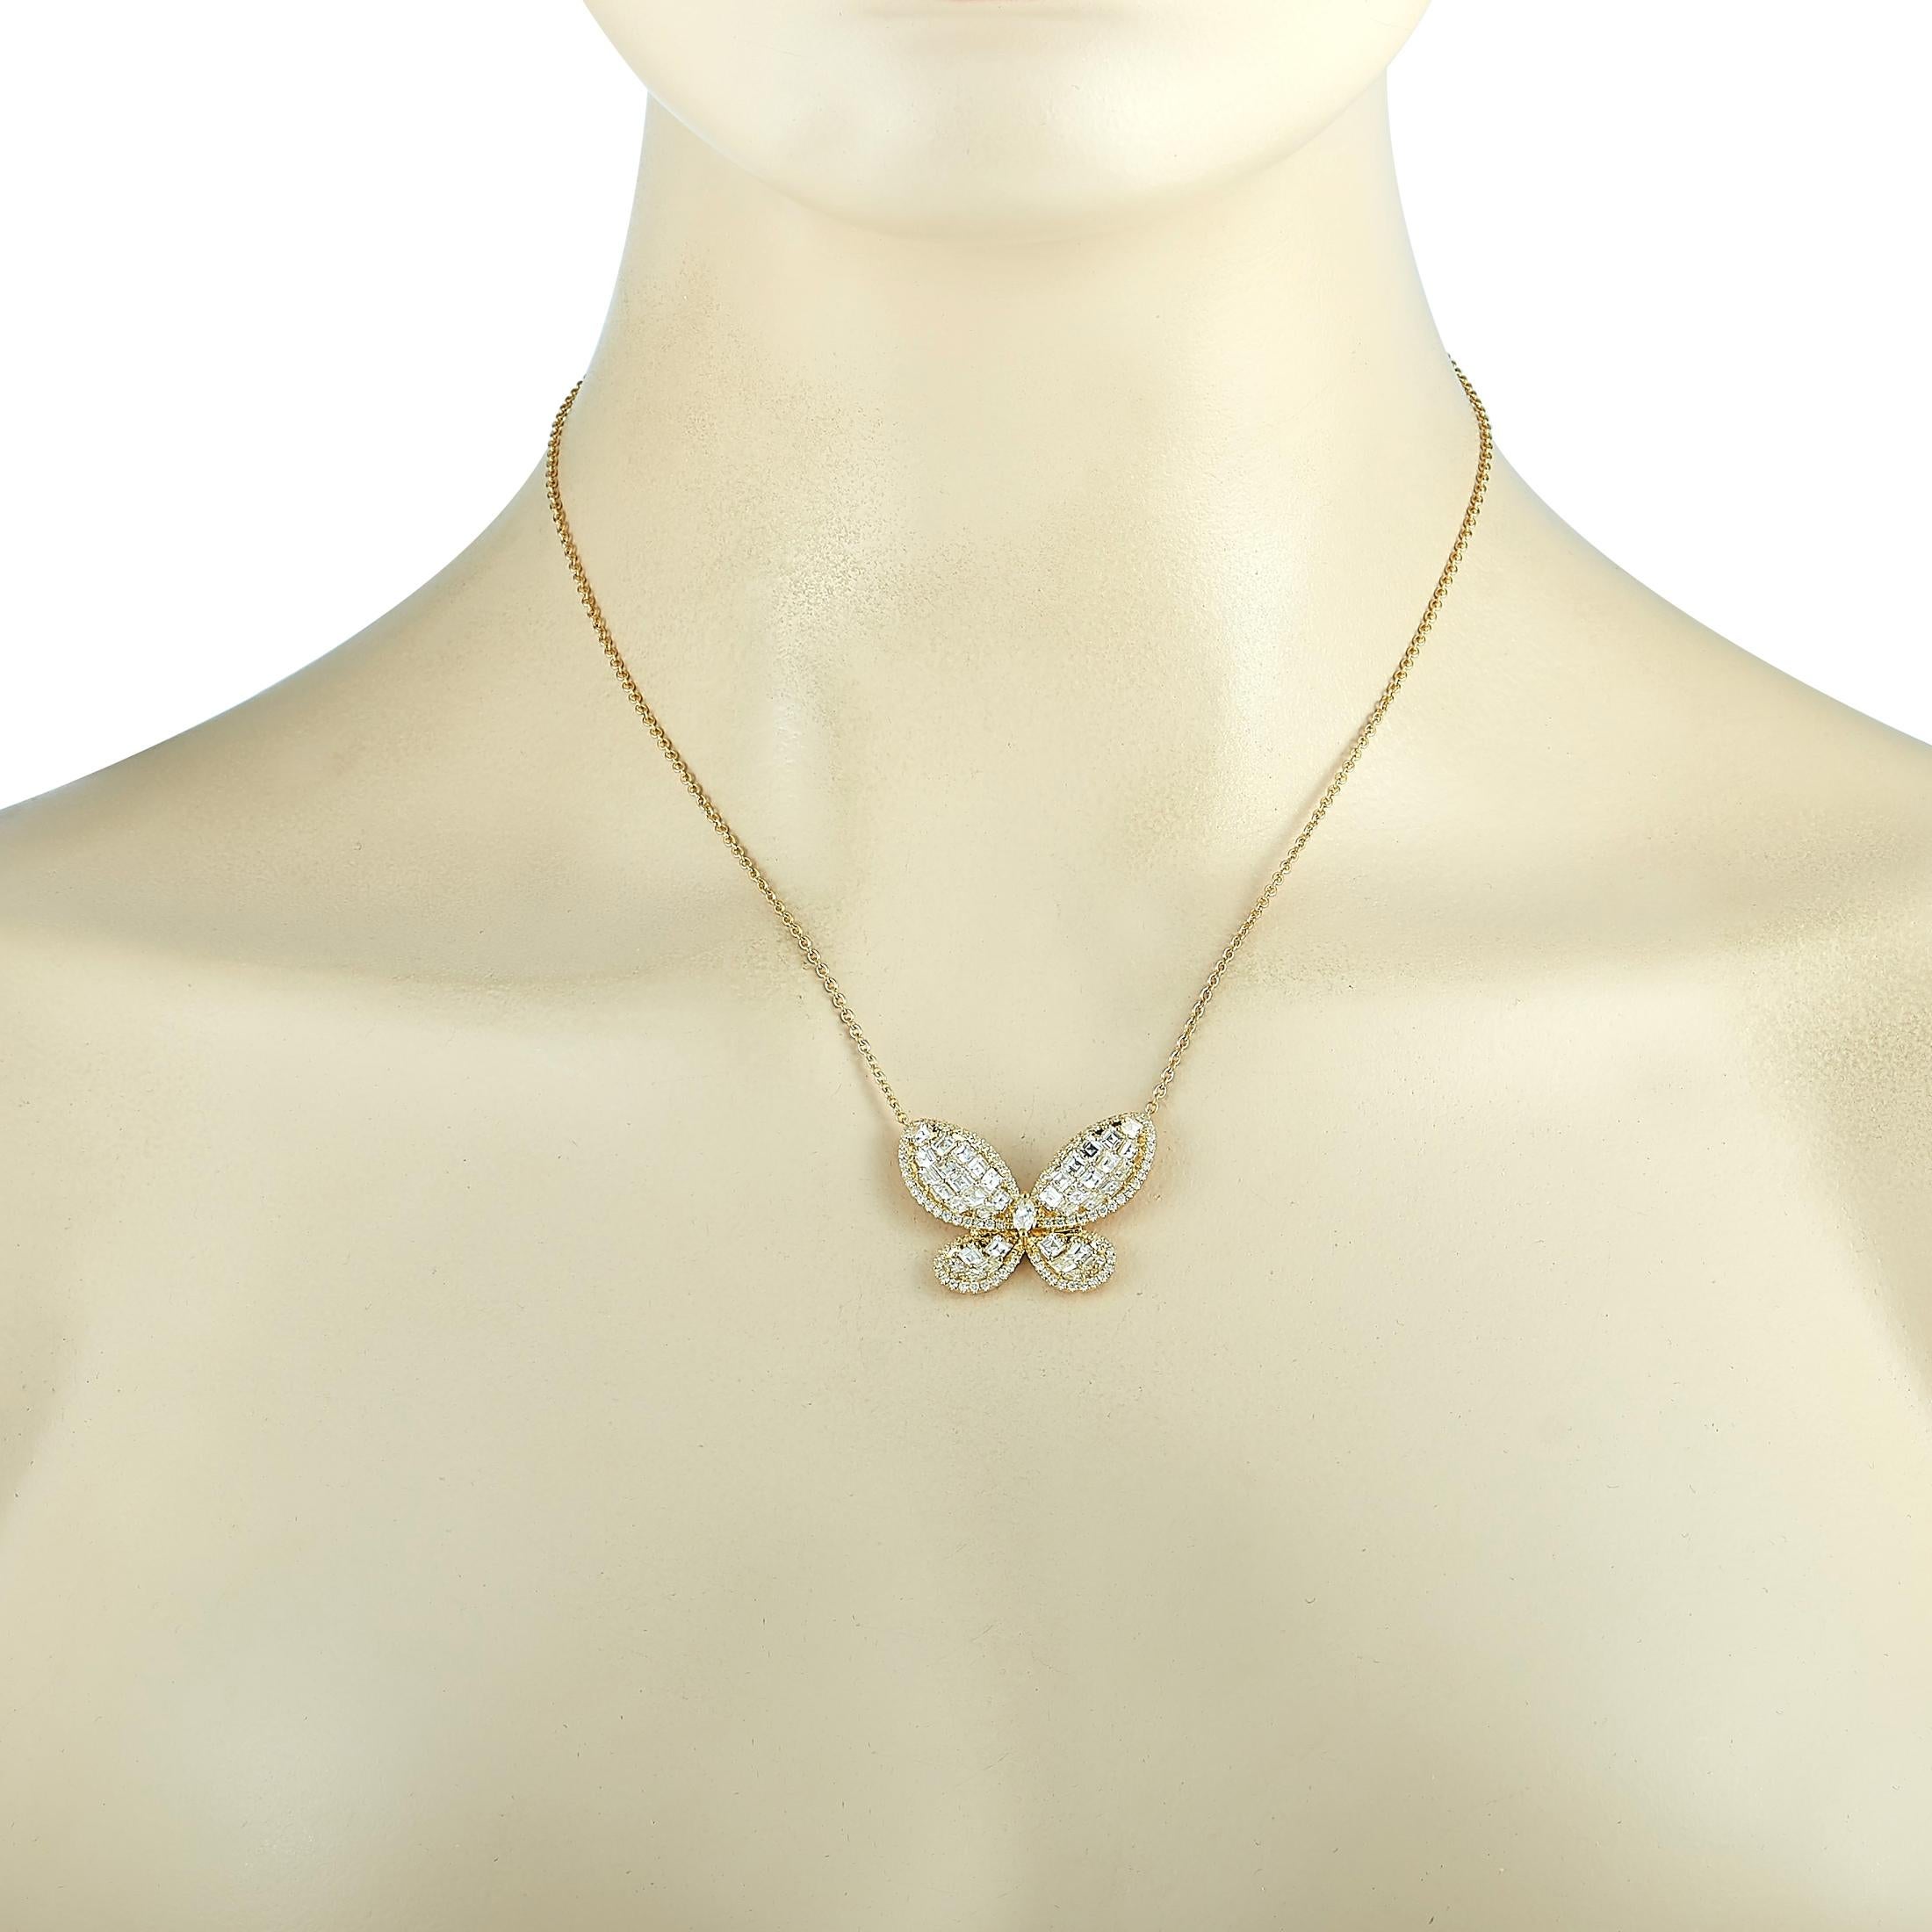 This LB Exclusive necklace is crafted from 18K yellow gold and weighs 9.8 grams. It is presented with a 16” chain and a butterfly pendant that measures 1” in length and 1.25” in width. The necklace is set with a 0.24 ct marquise diamond and with